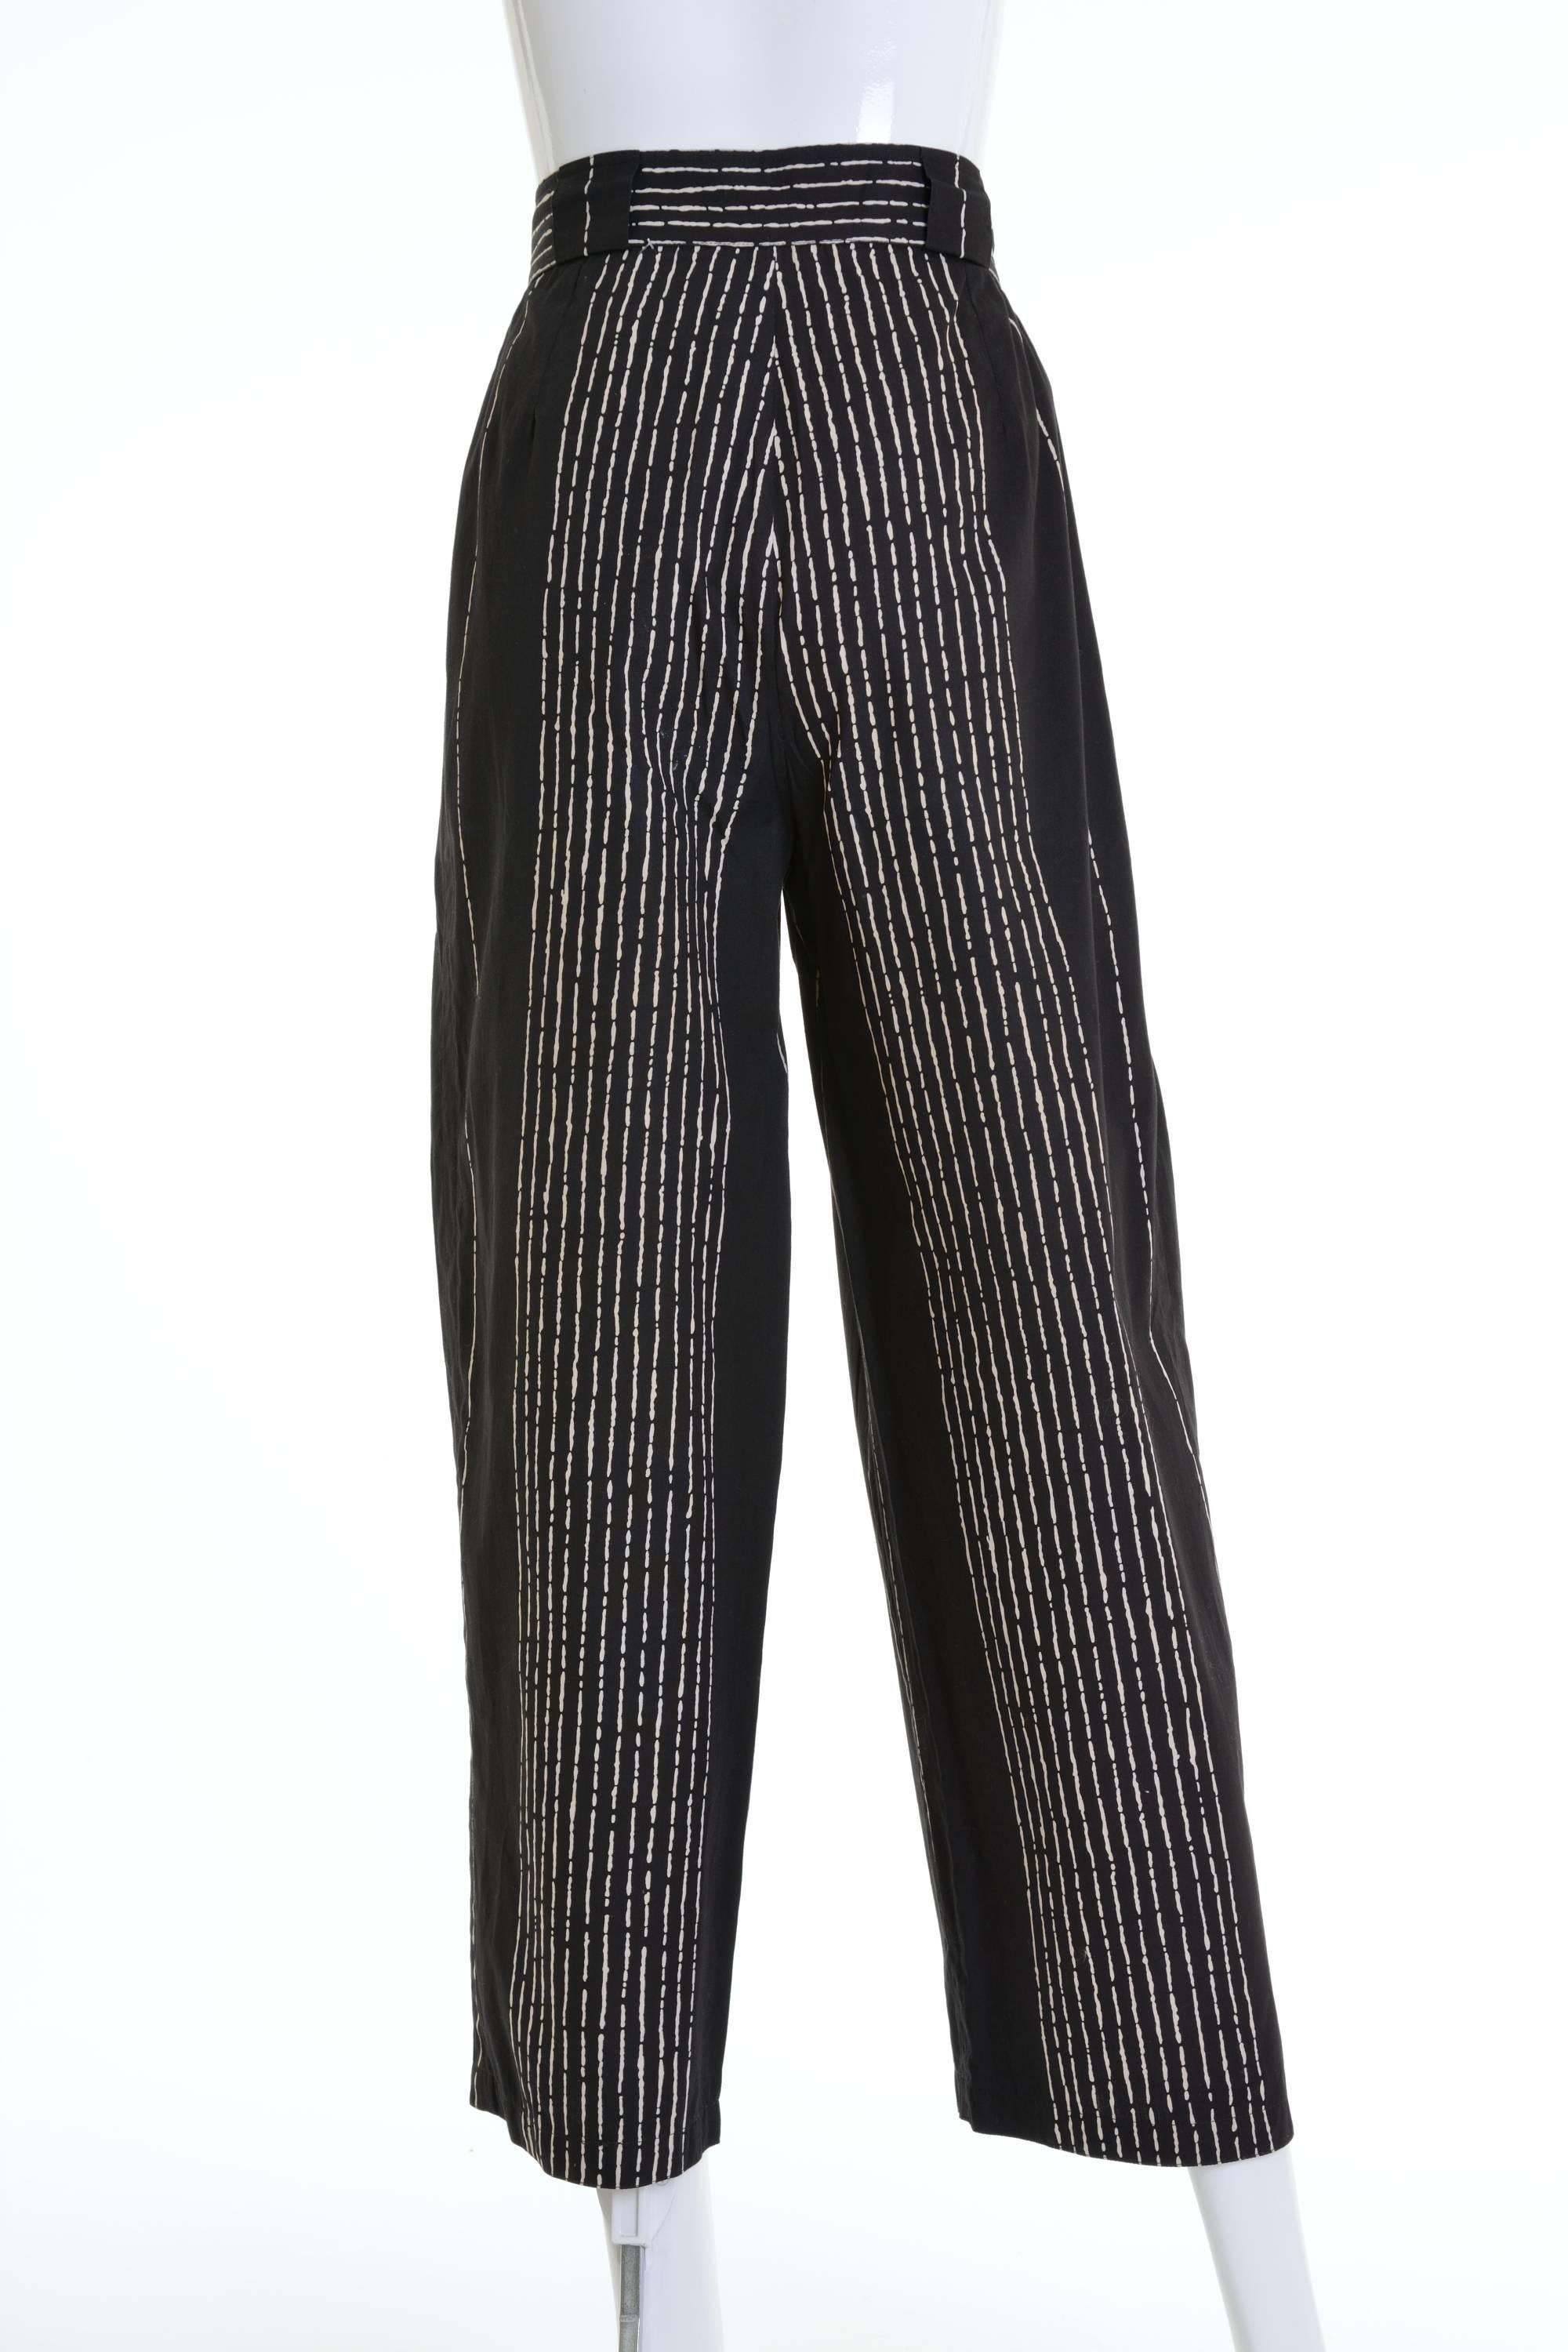 1980s GIANNI VERSACE Black Striped Cotton Pants In Good Condition In Milan, Italy